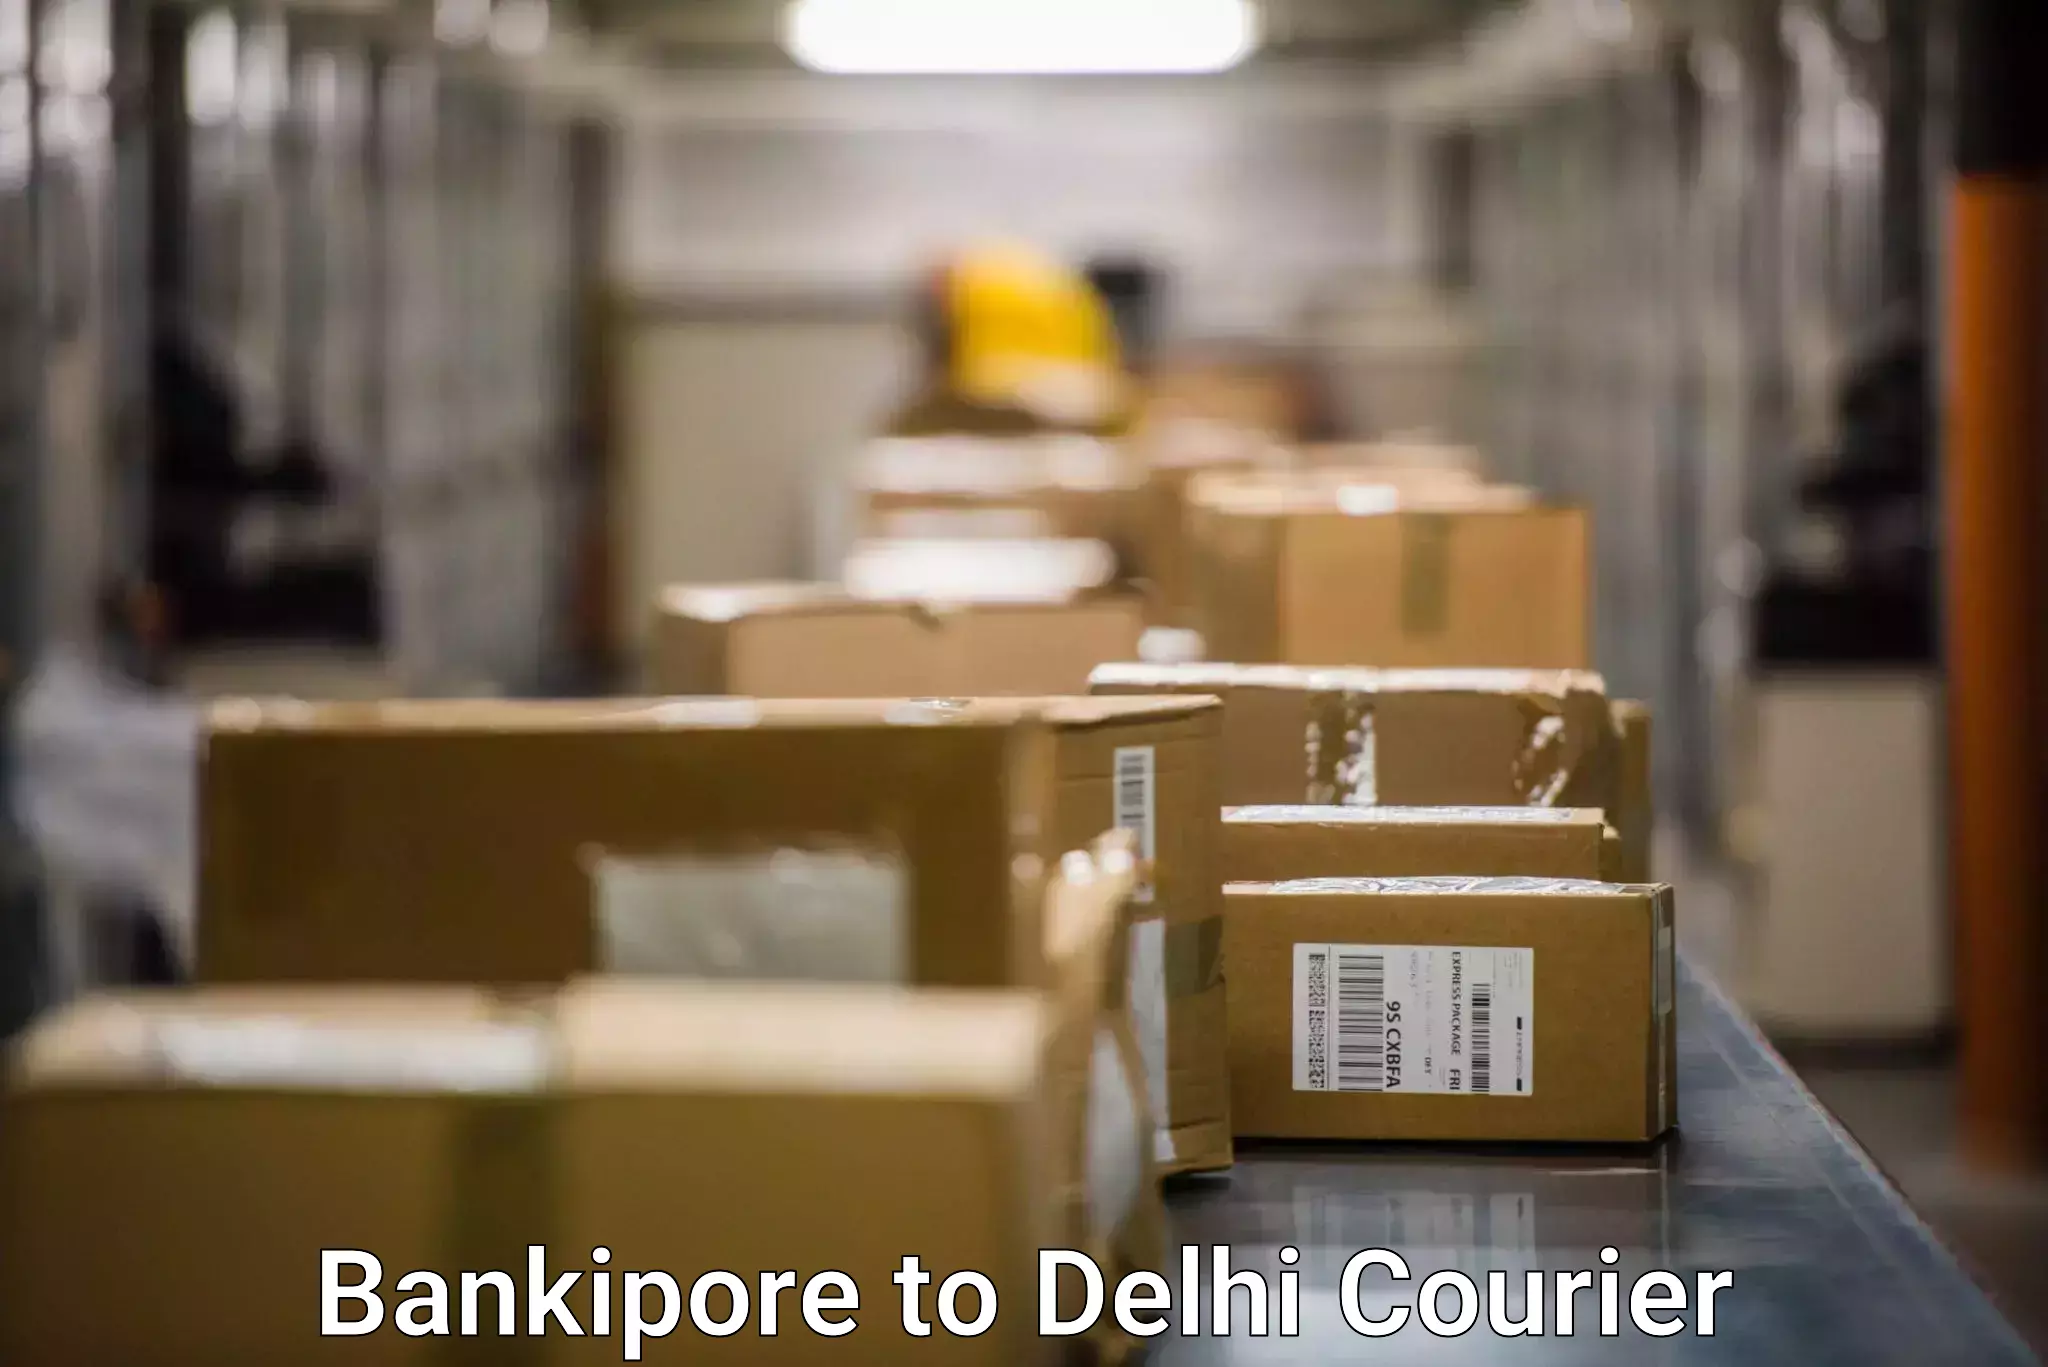 Doorstep delivery service Bankipore to East Delhi